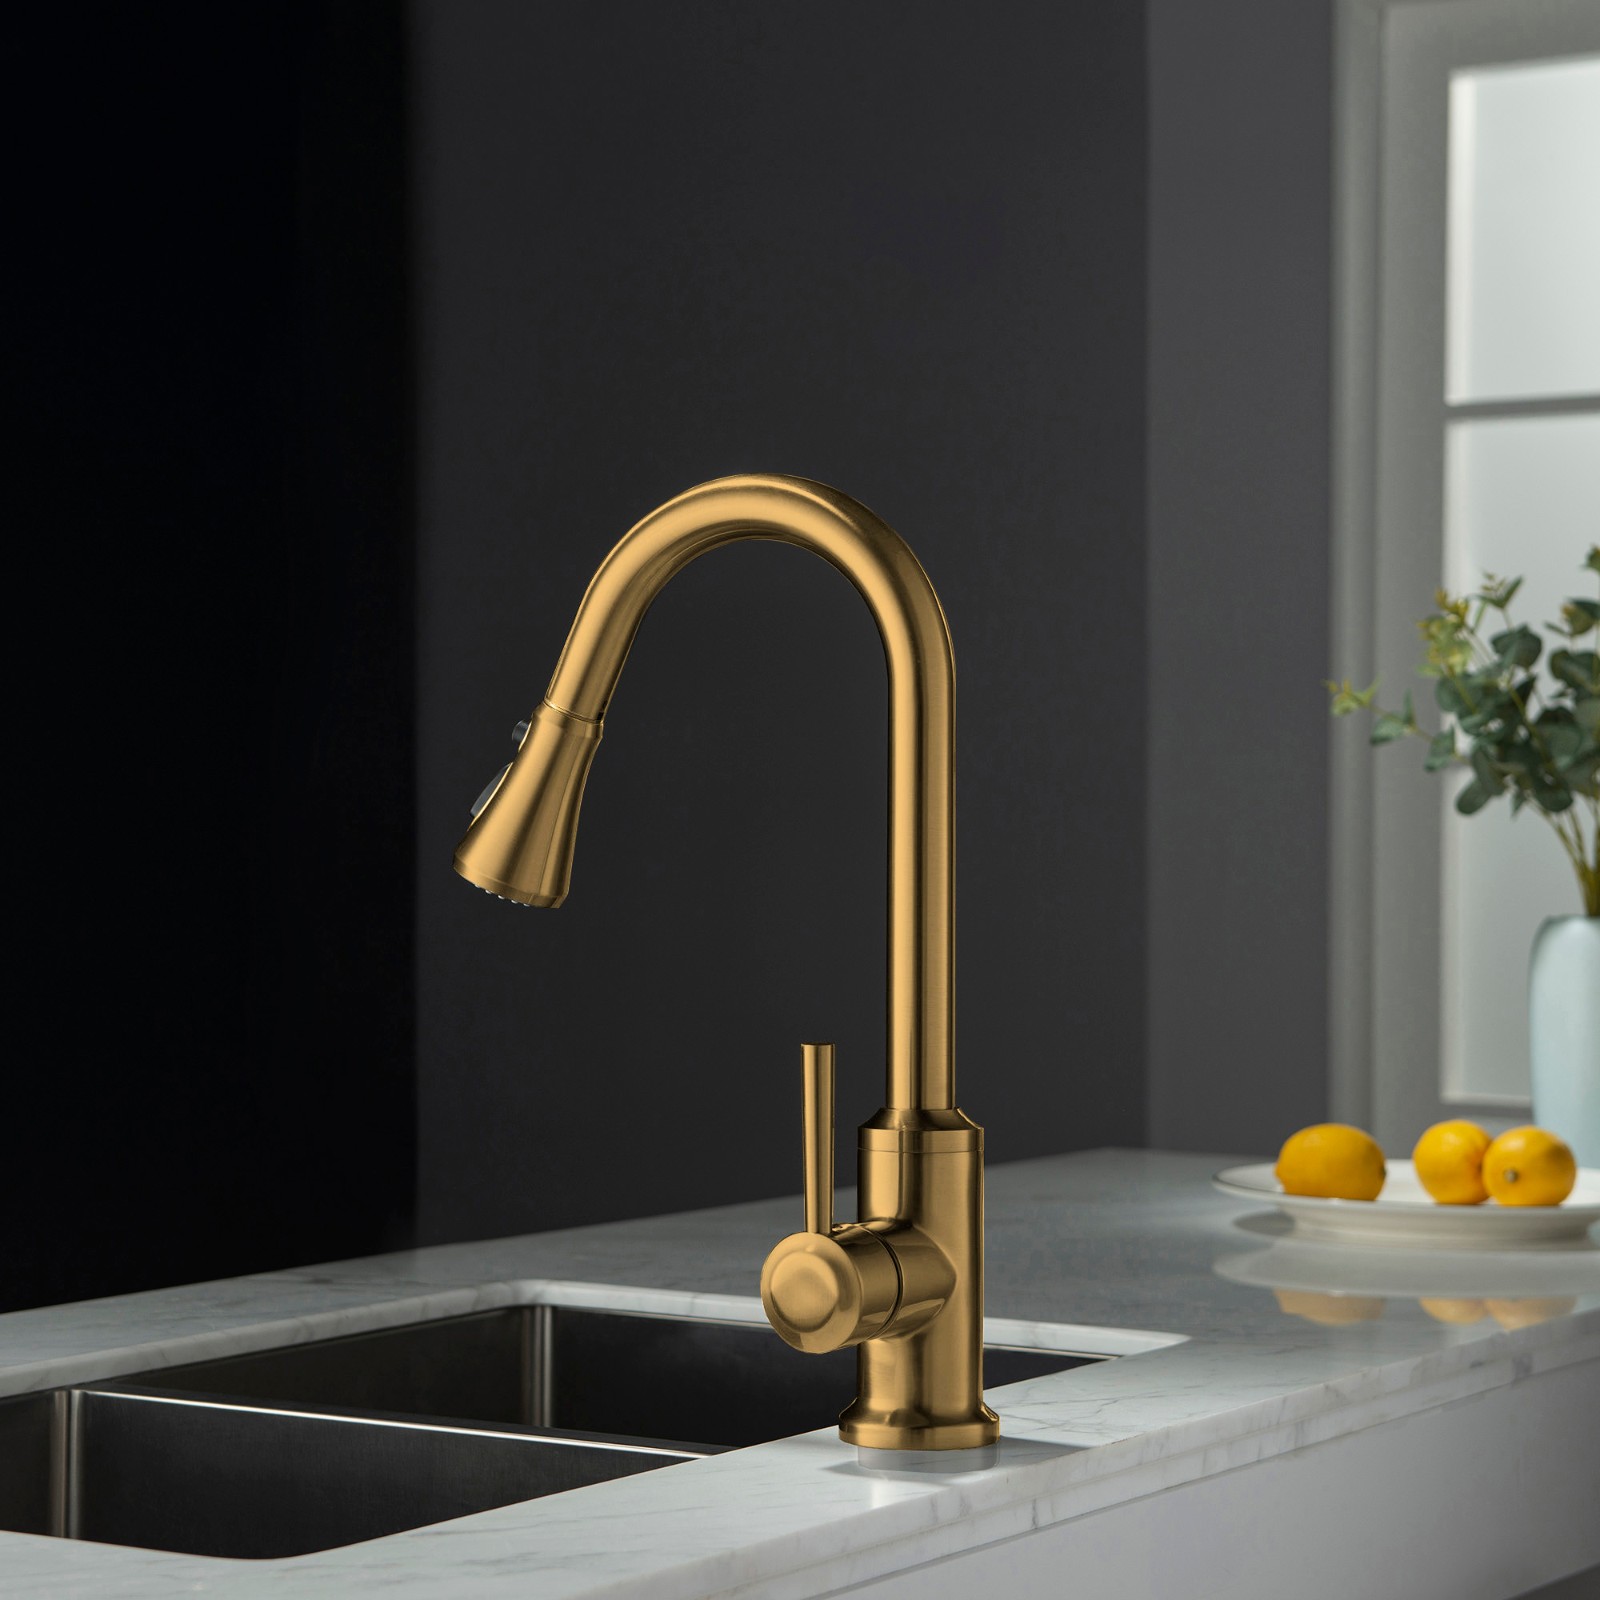  WOODBRIDGE WK101201BG Stainless Steel Single Handle Pull Down Kitchen Faucet in Brushed Gold Finish._4998